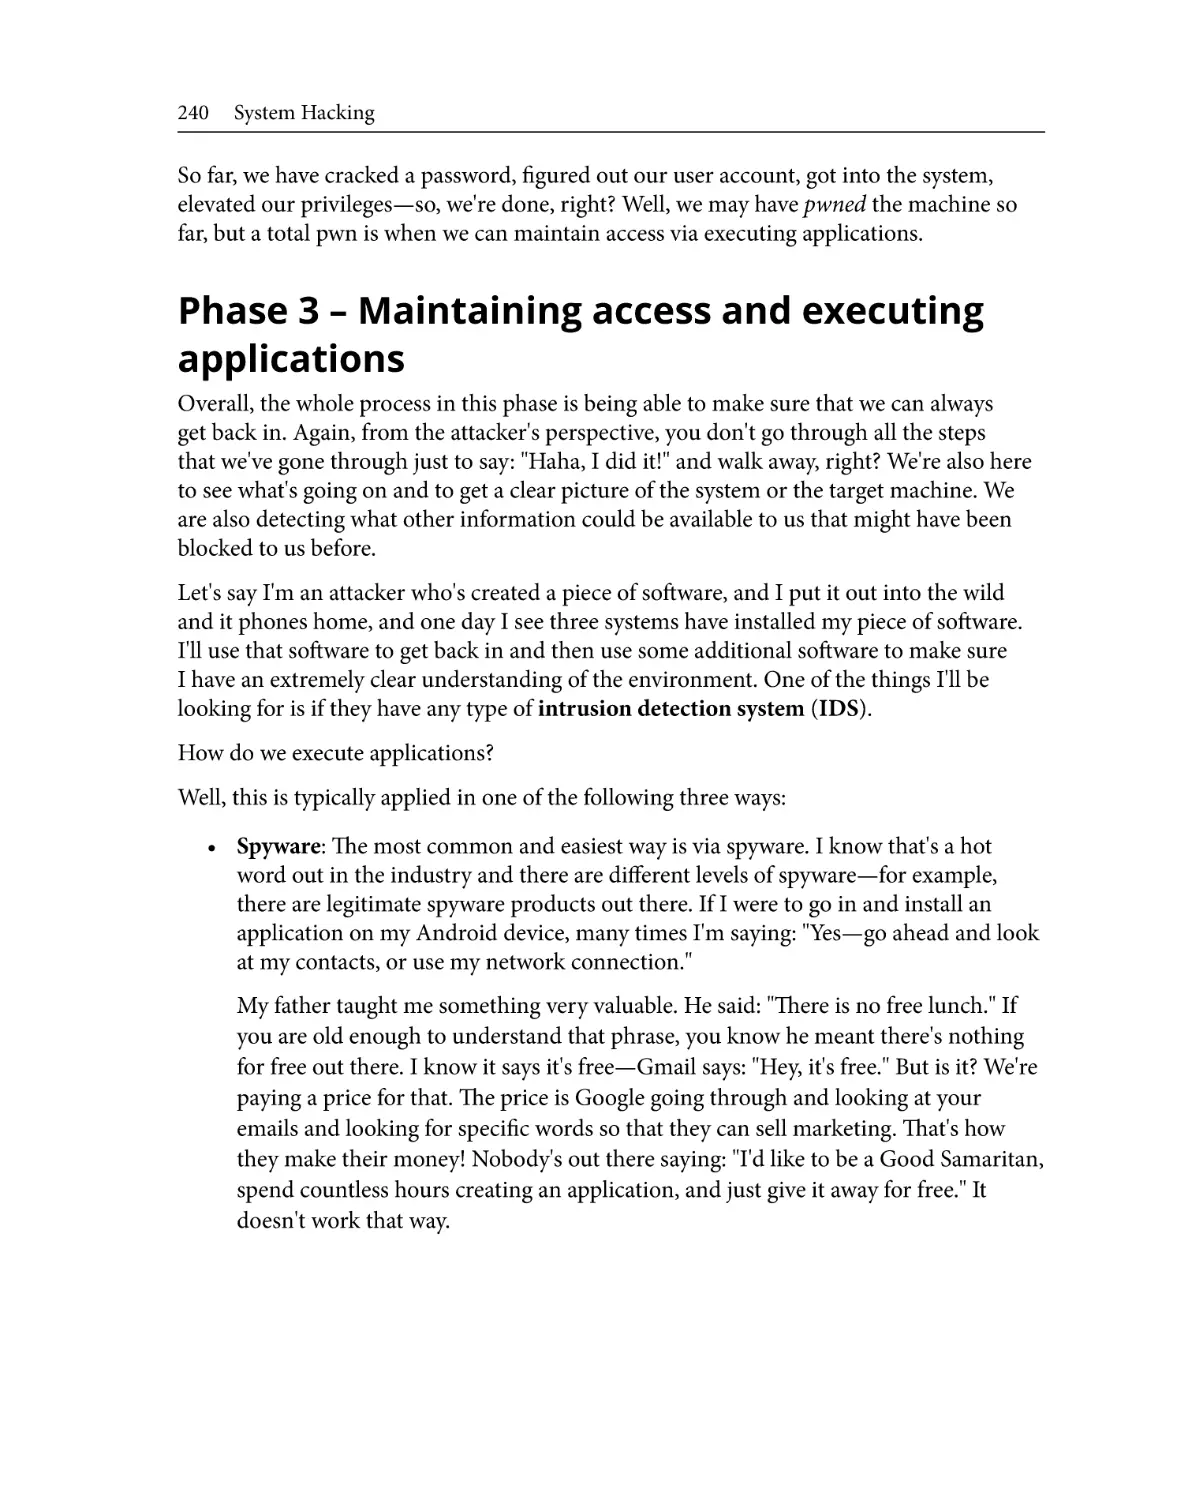 Phase 3 – Maintaining access and executing applications